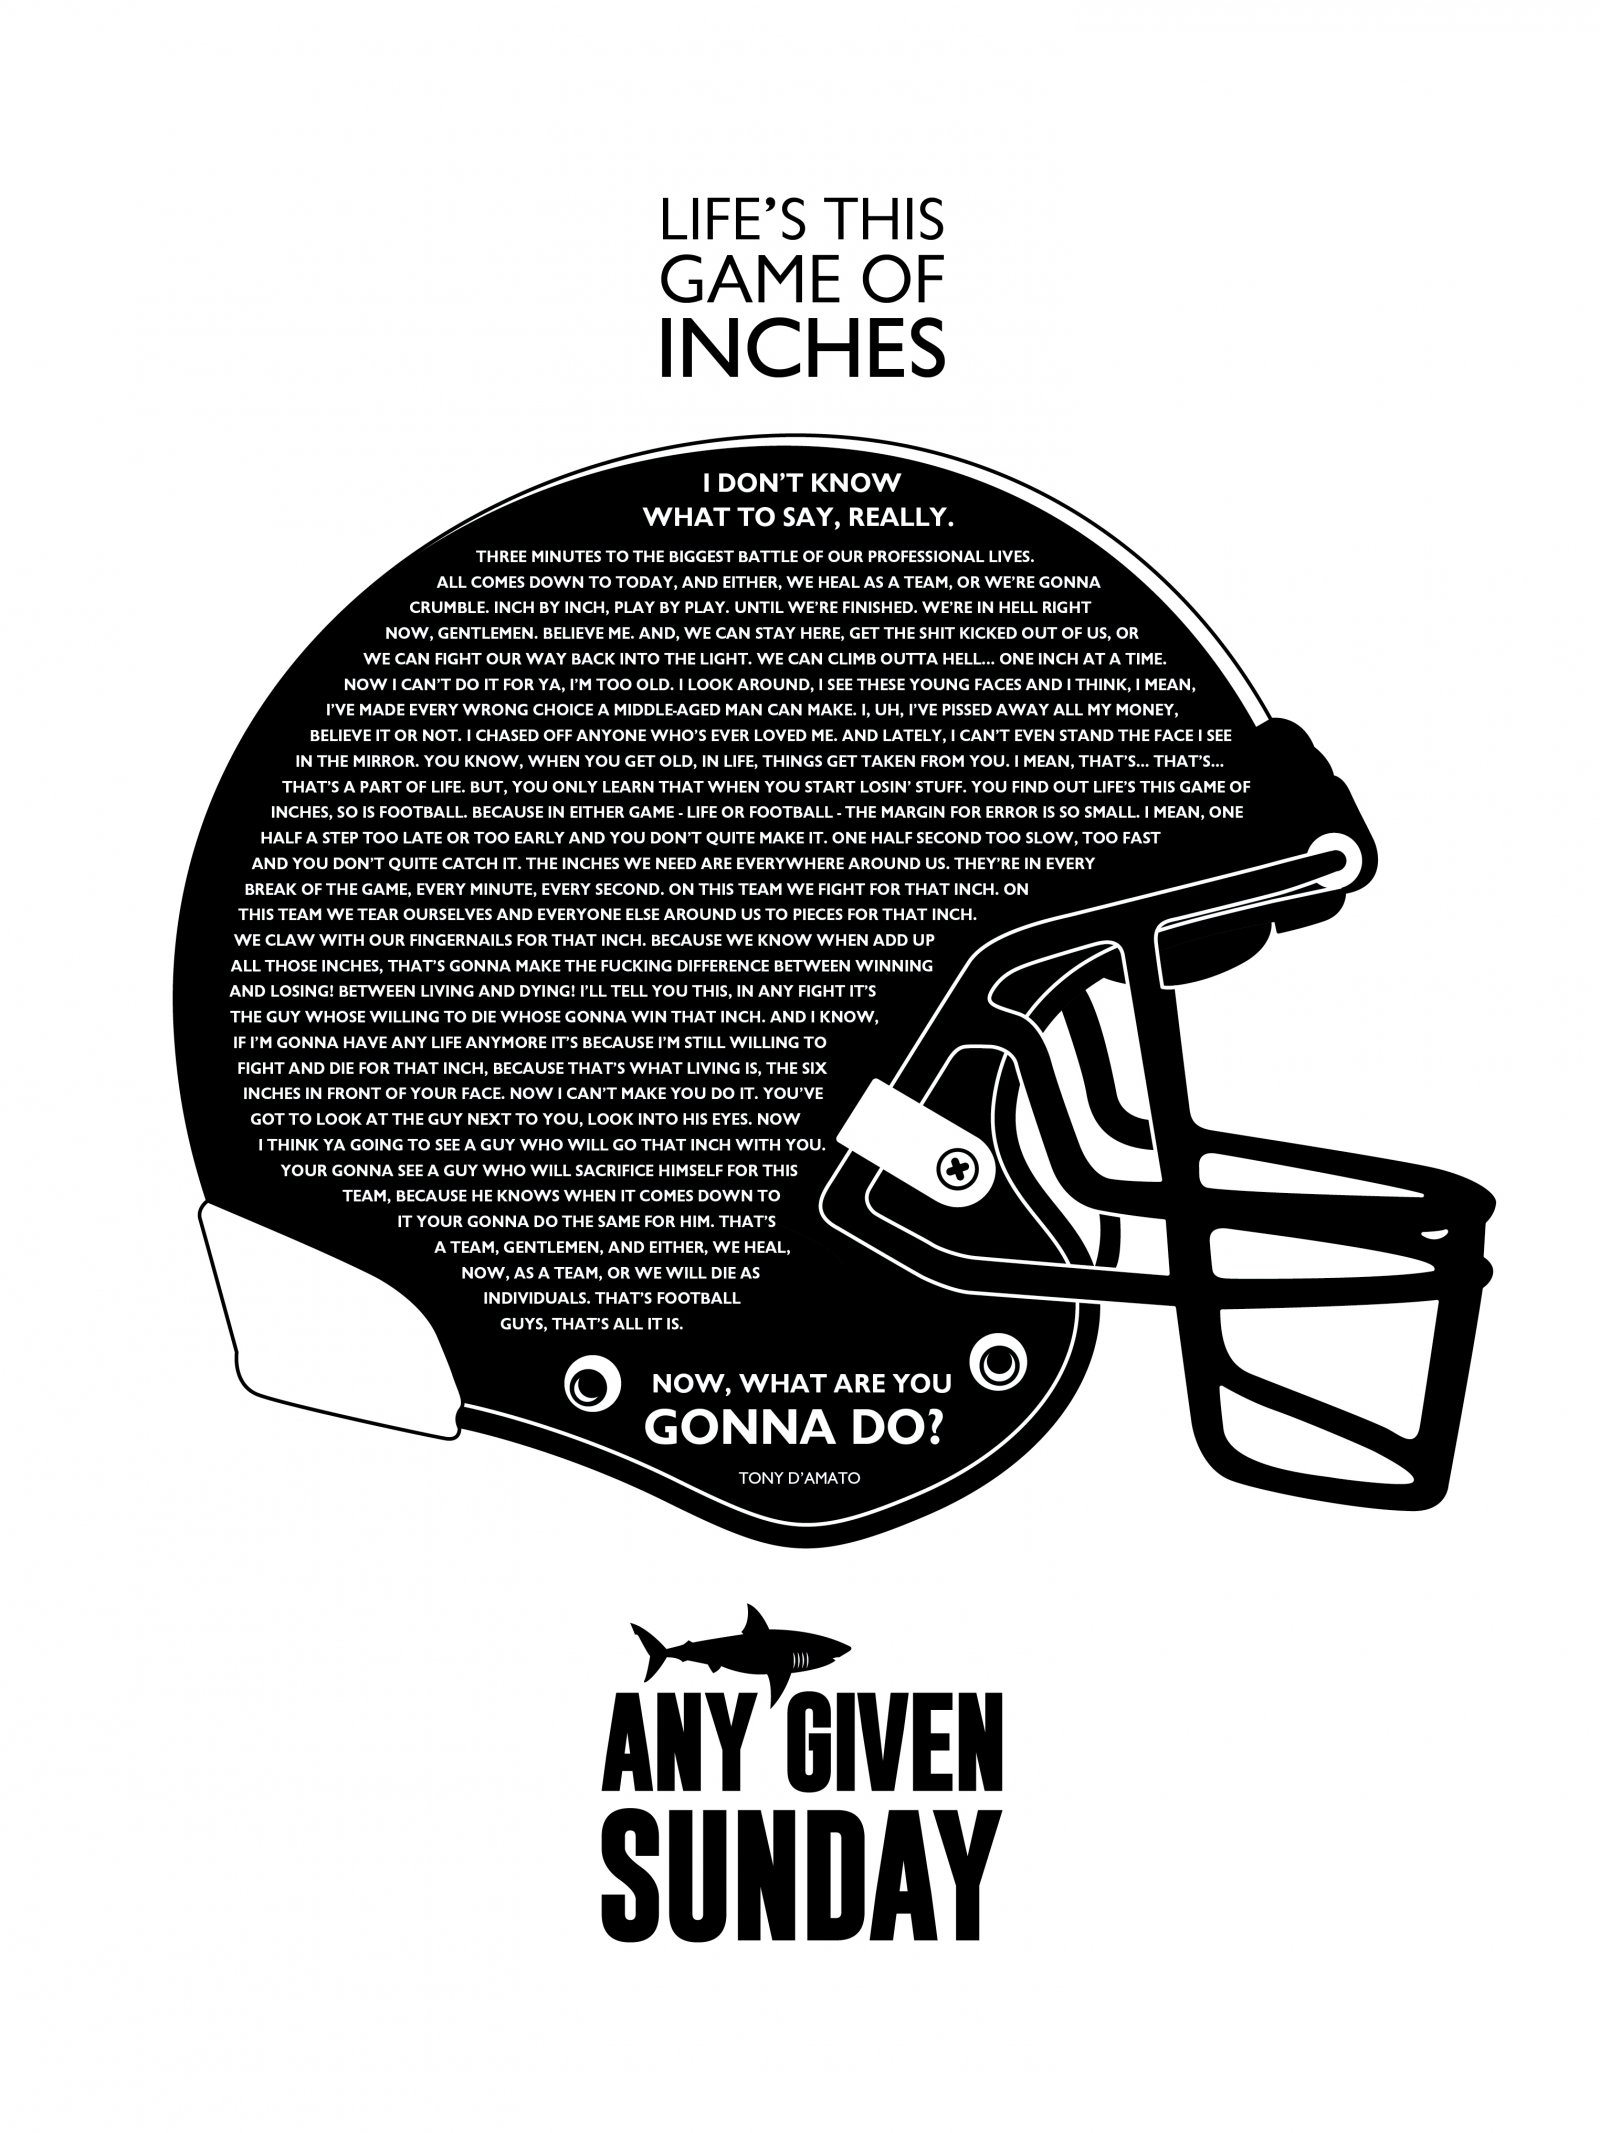 Any Given Sunday - Life is a game of inches 